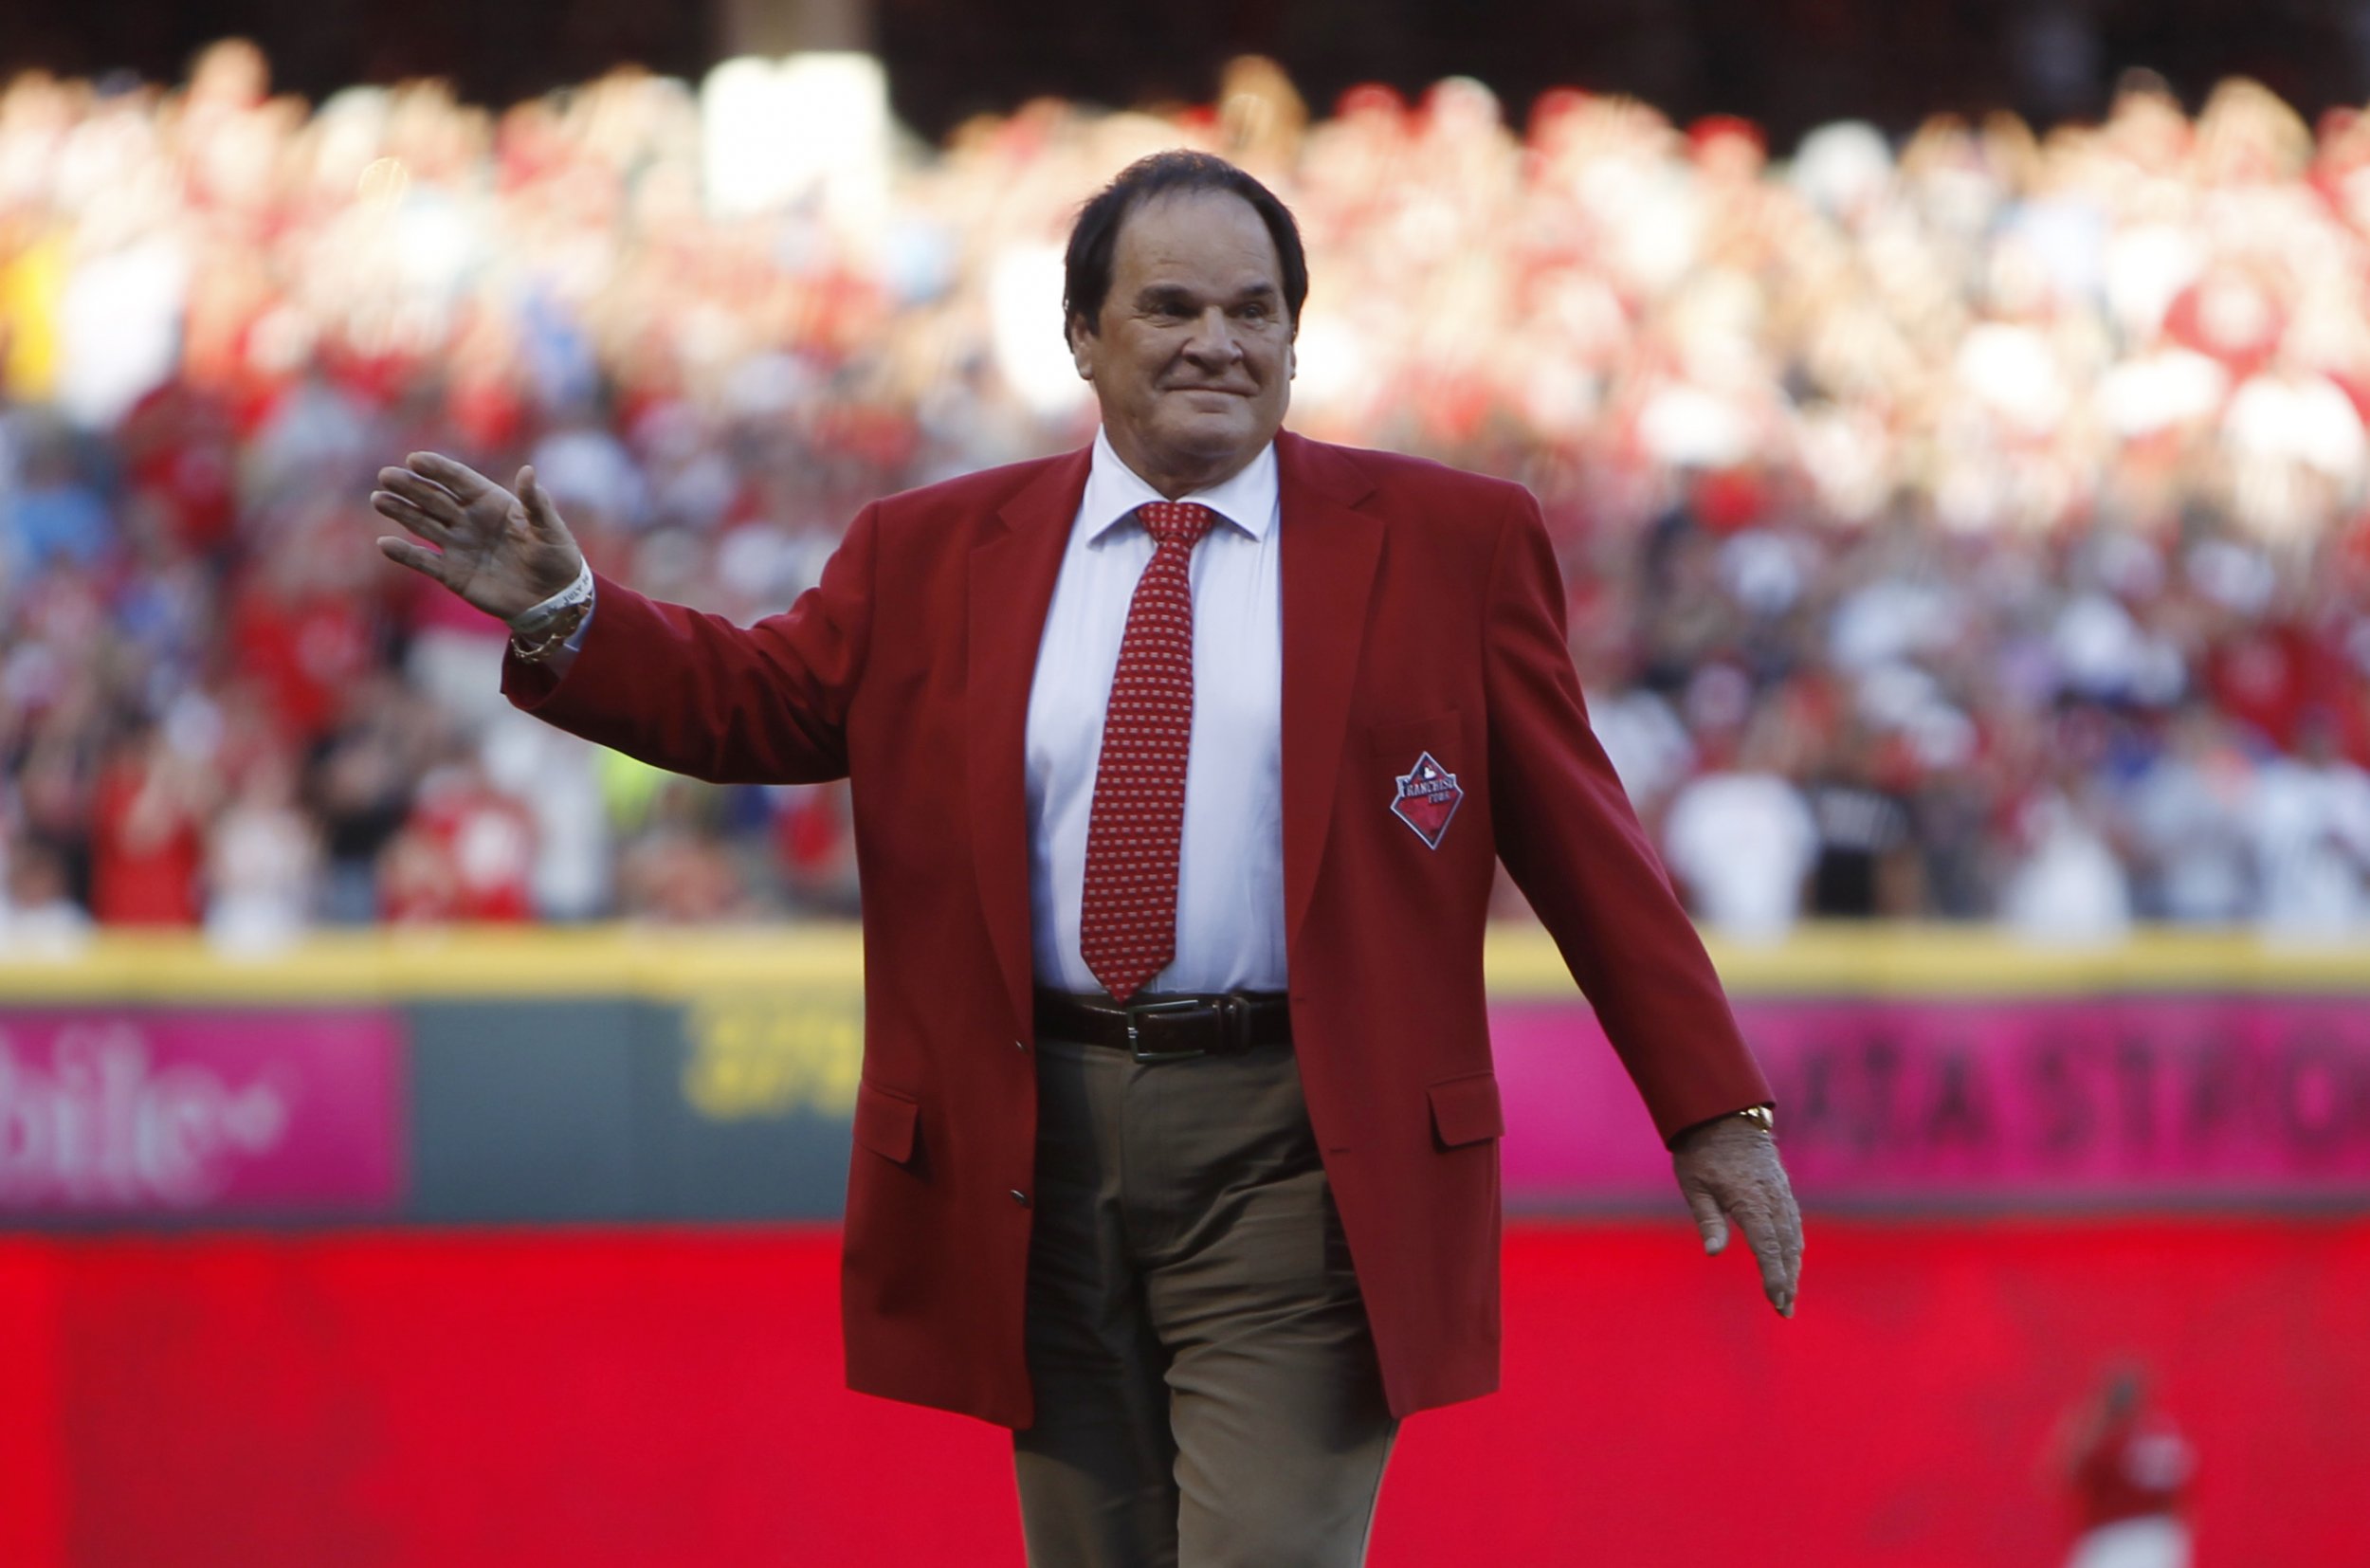 Pete Rose Meets With Major League Baseball to Discuss Possible Reinstatement